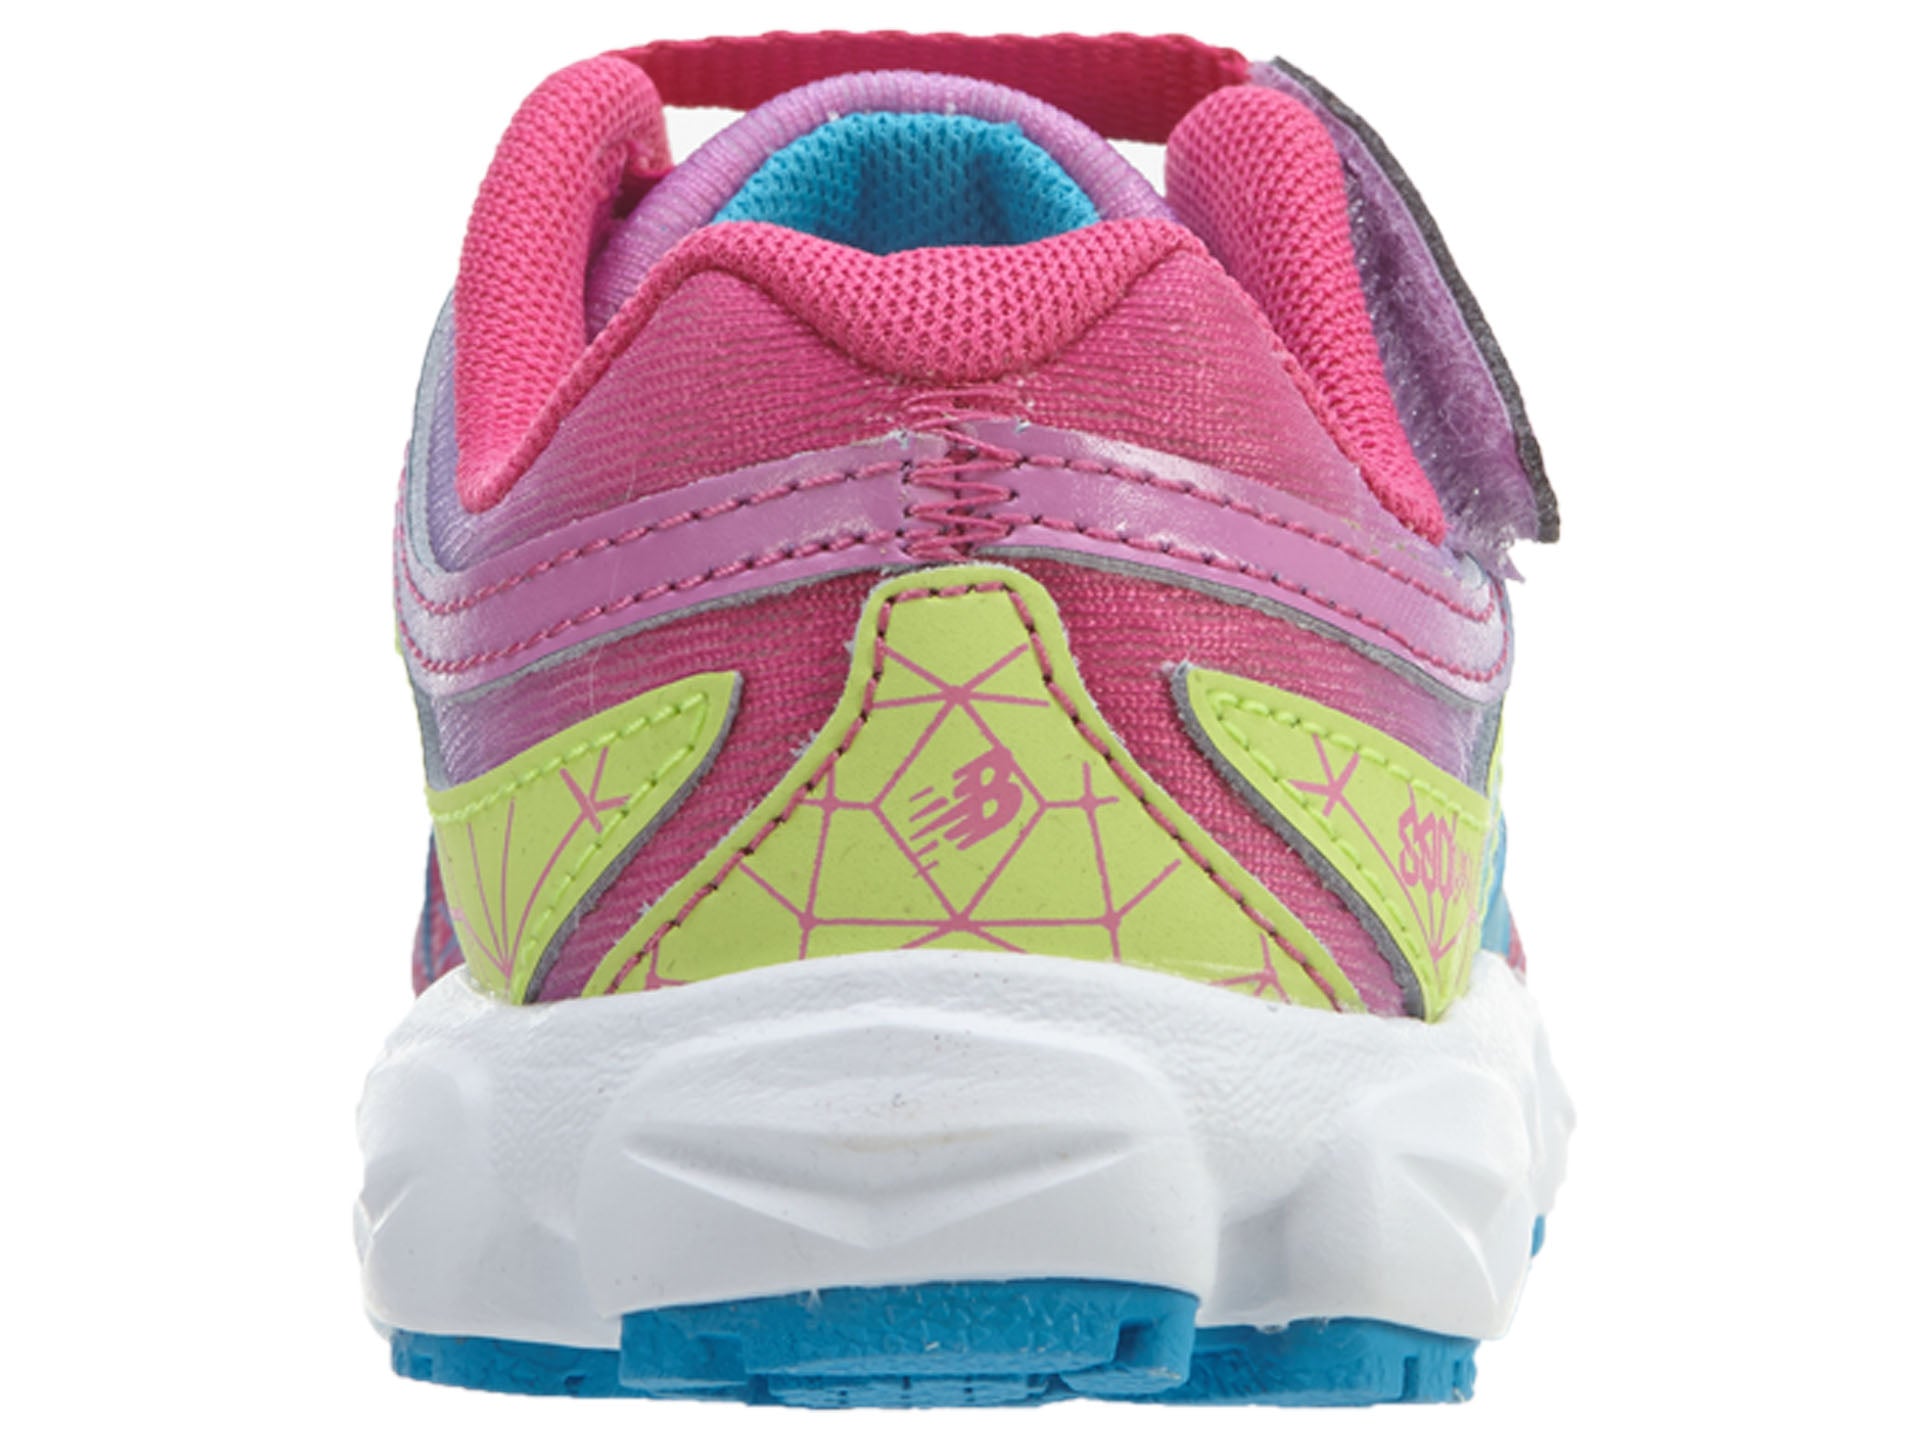 New Balance Running Course Toddlers Style : Kv890